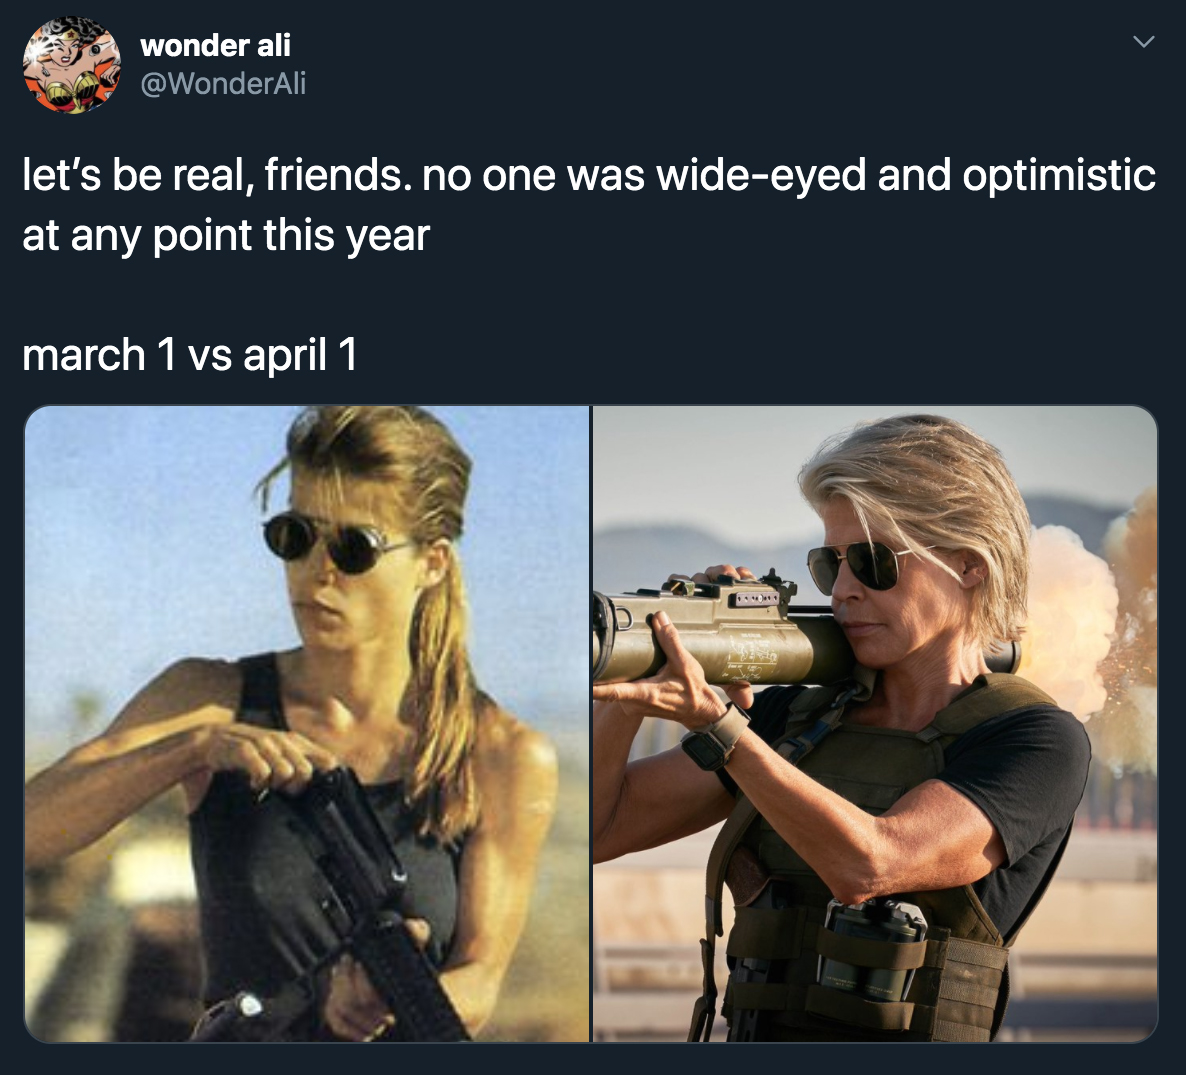 sarah connor terminator 2 - let's be real, friends, no one was wide eyed and optimistic at any point this year march 1 vs april 1